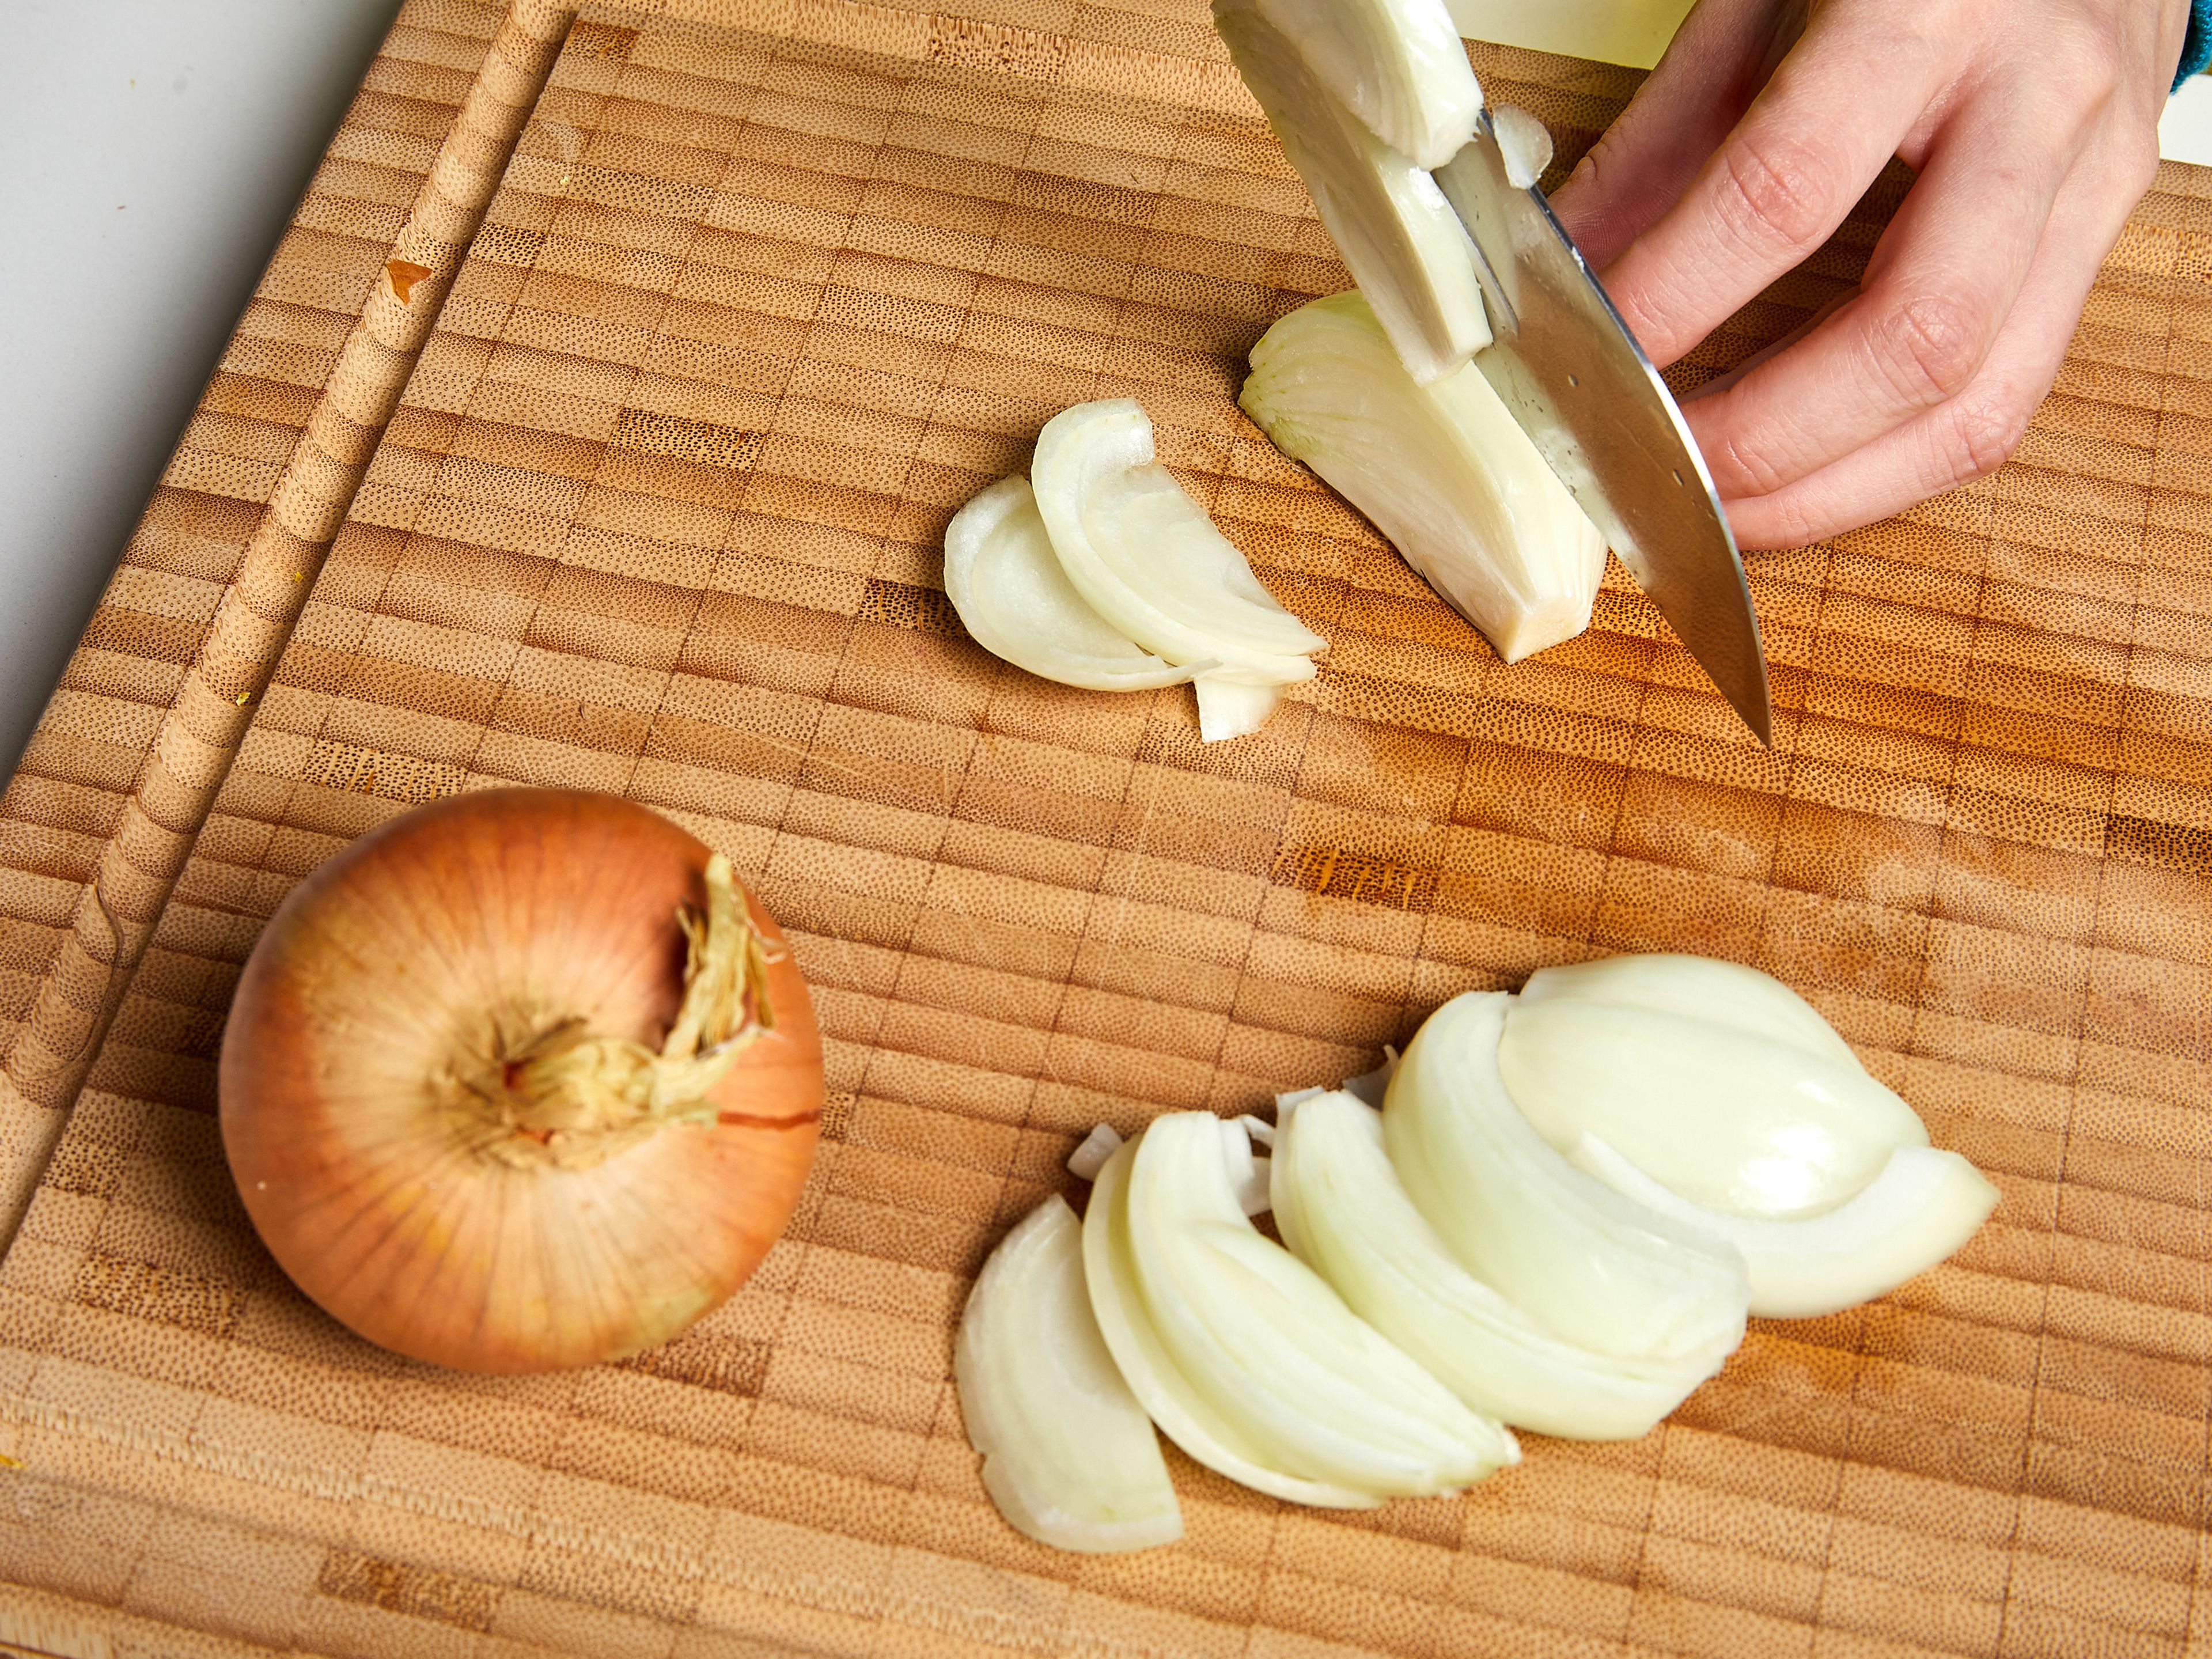 Finely dice one-third of the onions and cut the remaining onions into wedges. Heat and melt plant-based butter and olive oil in a large pot. Add onion wedges and cook over medium heat until caramelized, approx. 15 min, stirring occasionally. Be careful not to burn them.